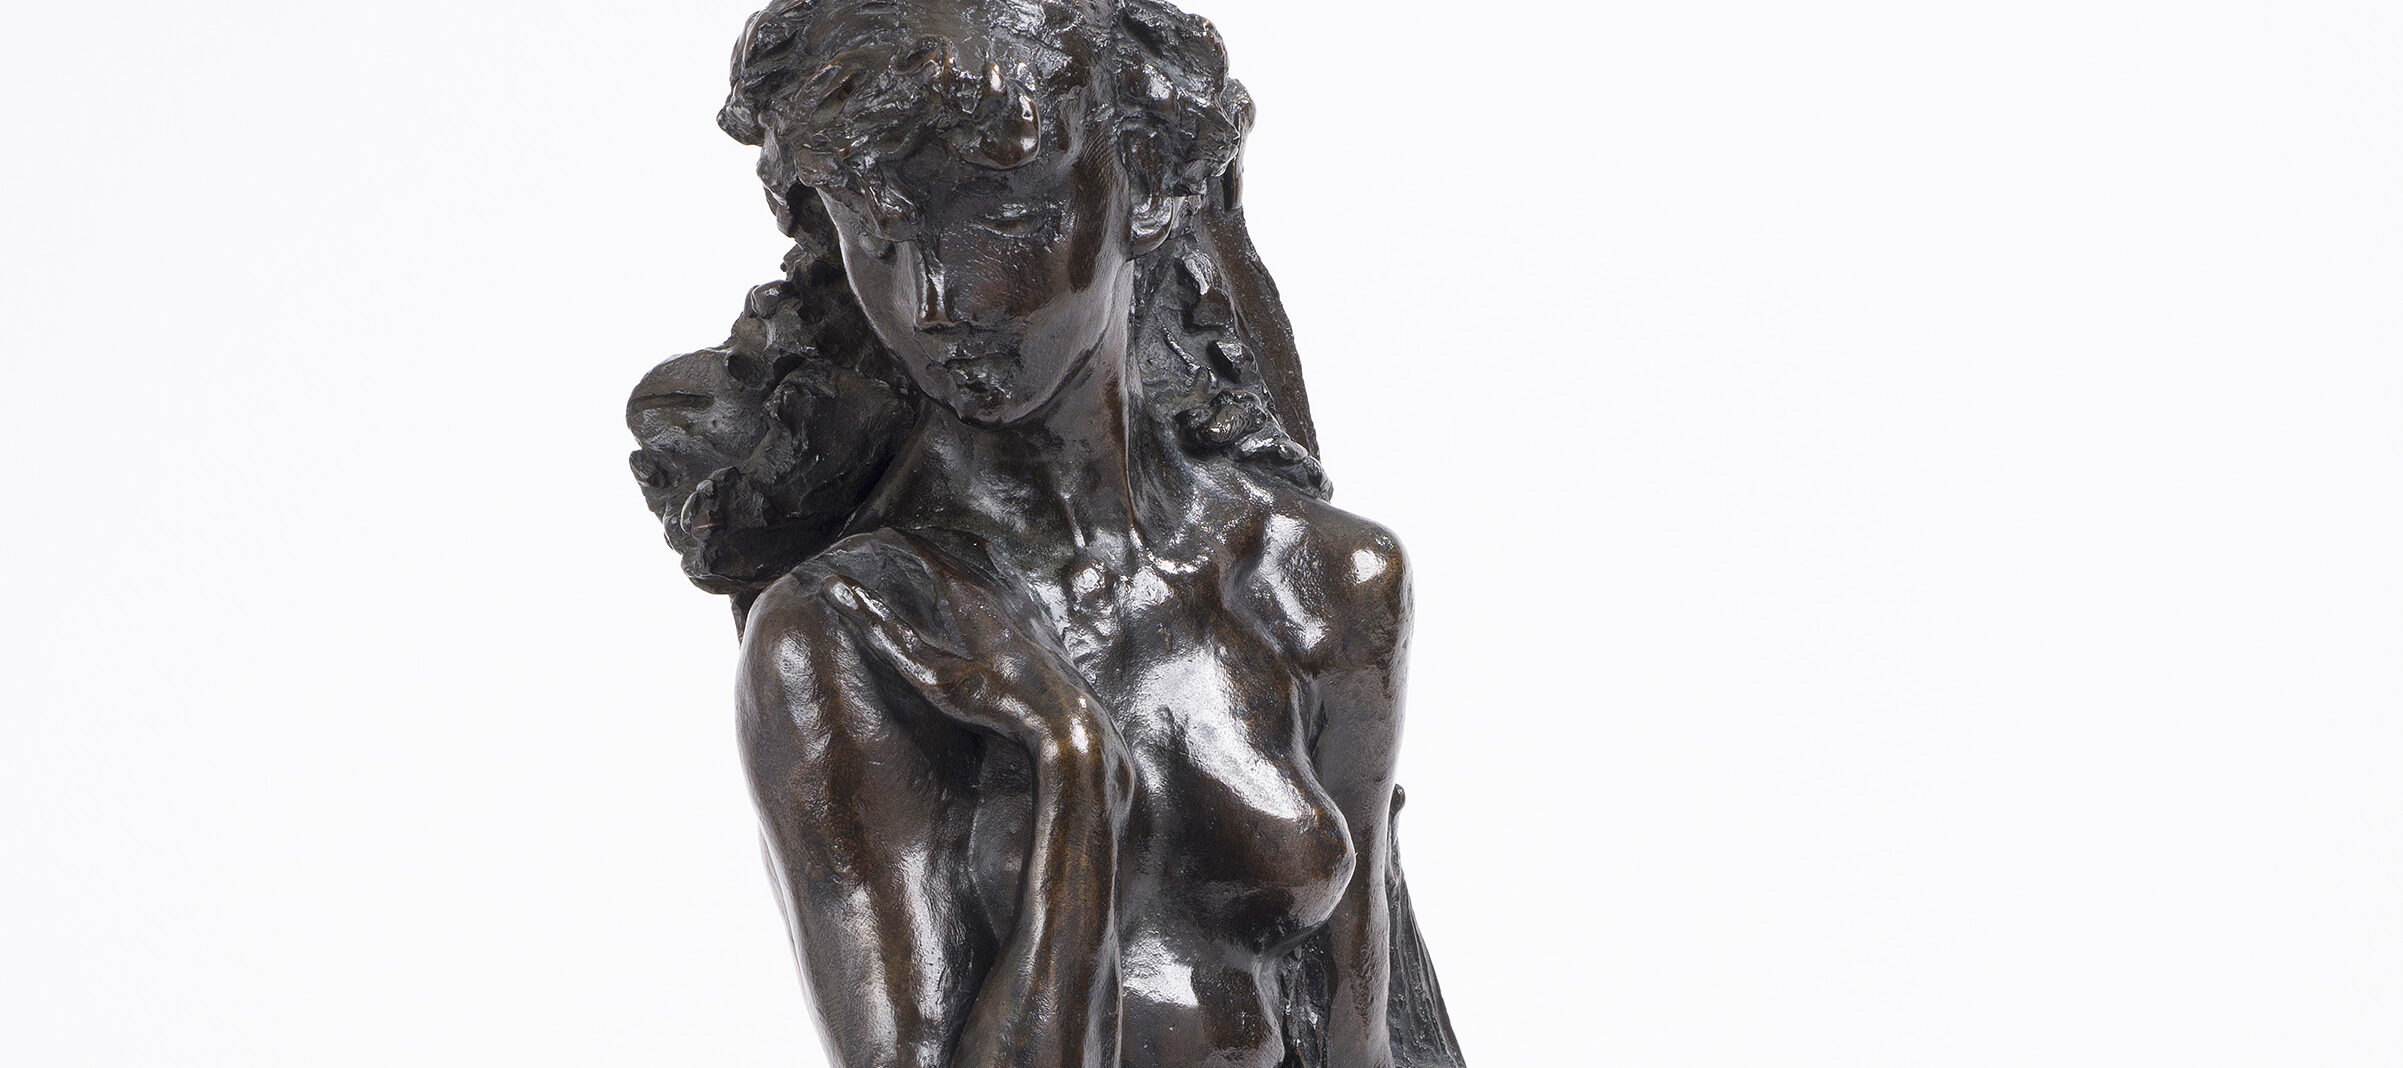 Bronze tabletop sculpture depicting a nude young woman seated on rough-hewn base, leaning against a sheaf of wheat. The figure's knees are drawn together, her left arm hanging at her side and her right arm bent upwards, clasping her shoulder.